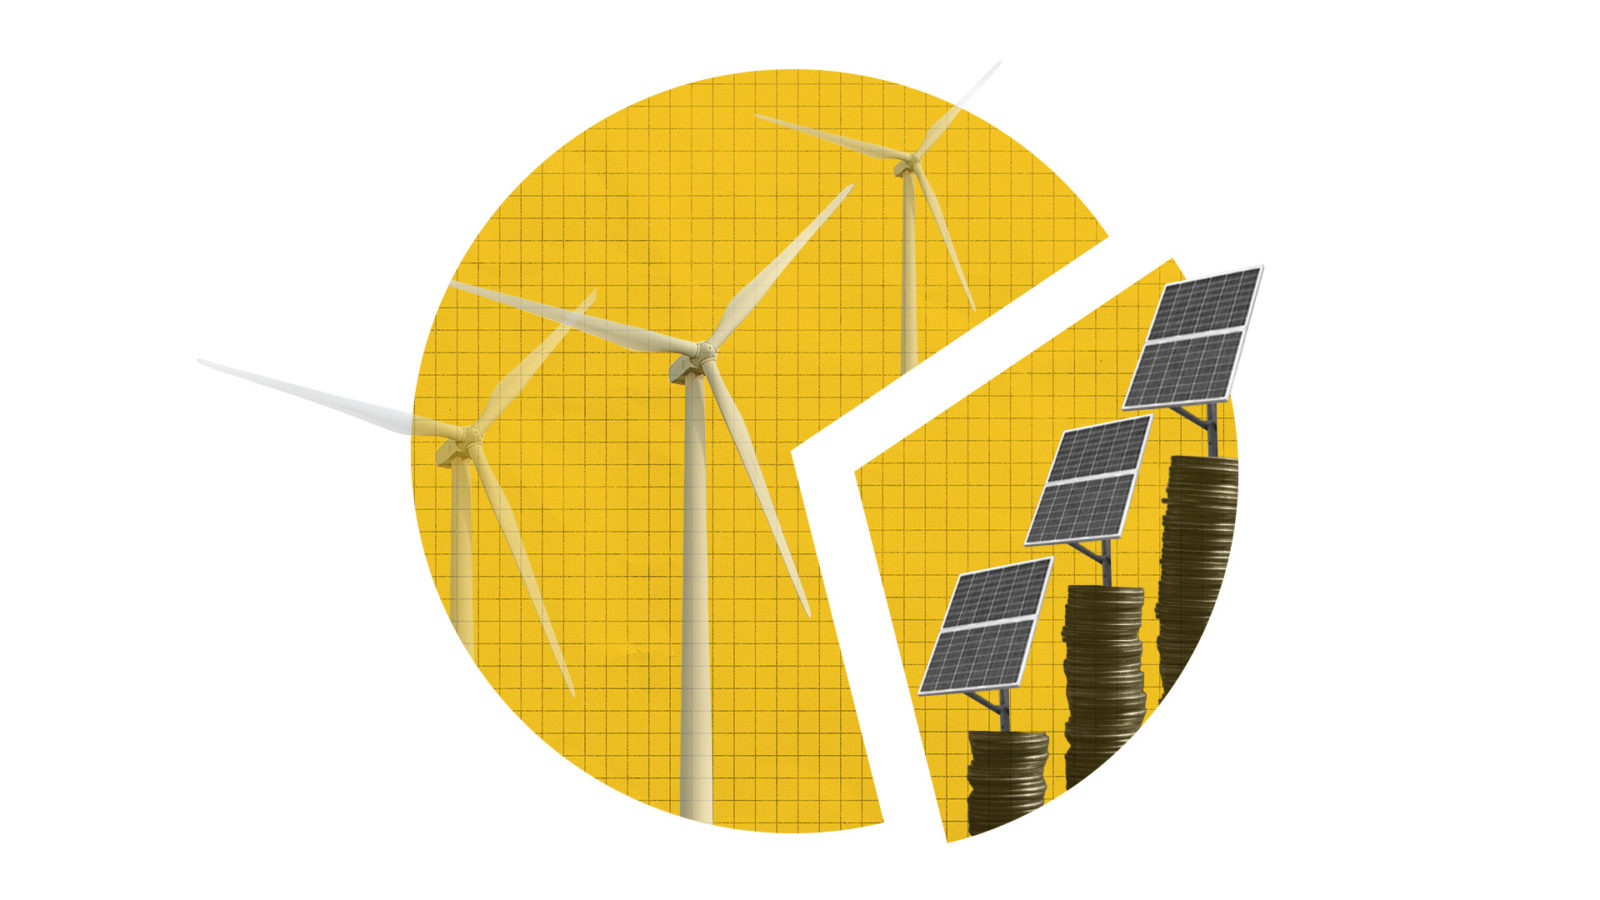 A yellow circle with a wedge cut out from it and is separated. The larger piece has three wind turbines on it. The smaller piece has three stacks of coins, each with a solar panel on top. There is graph paper overlying both sections. The image represents RPS carve-outs.